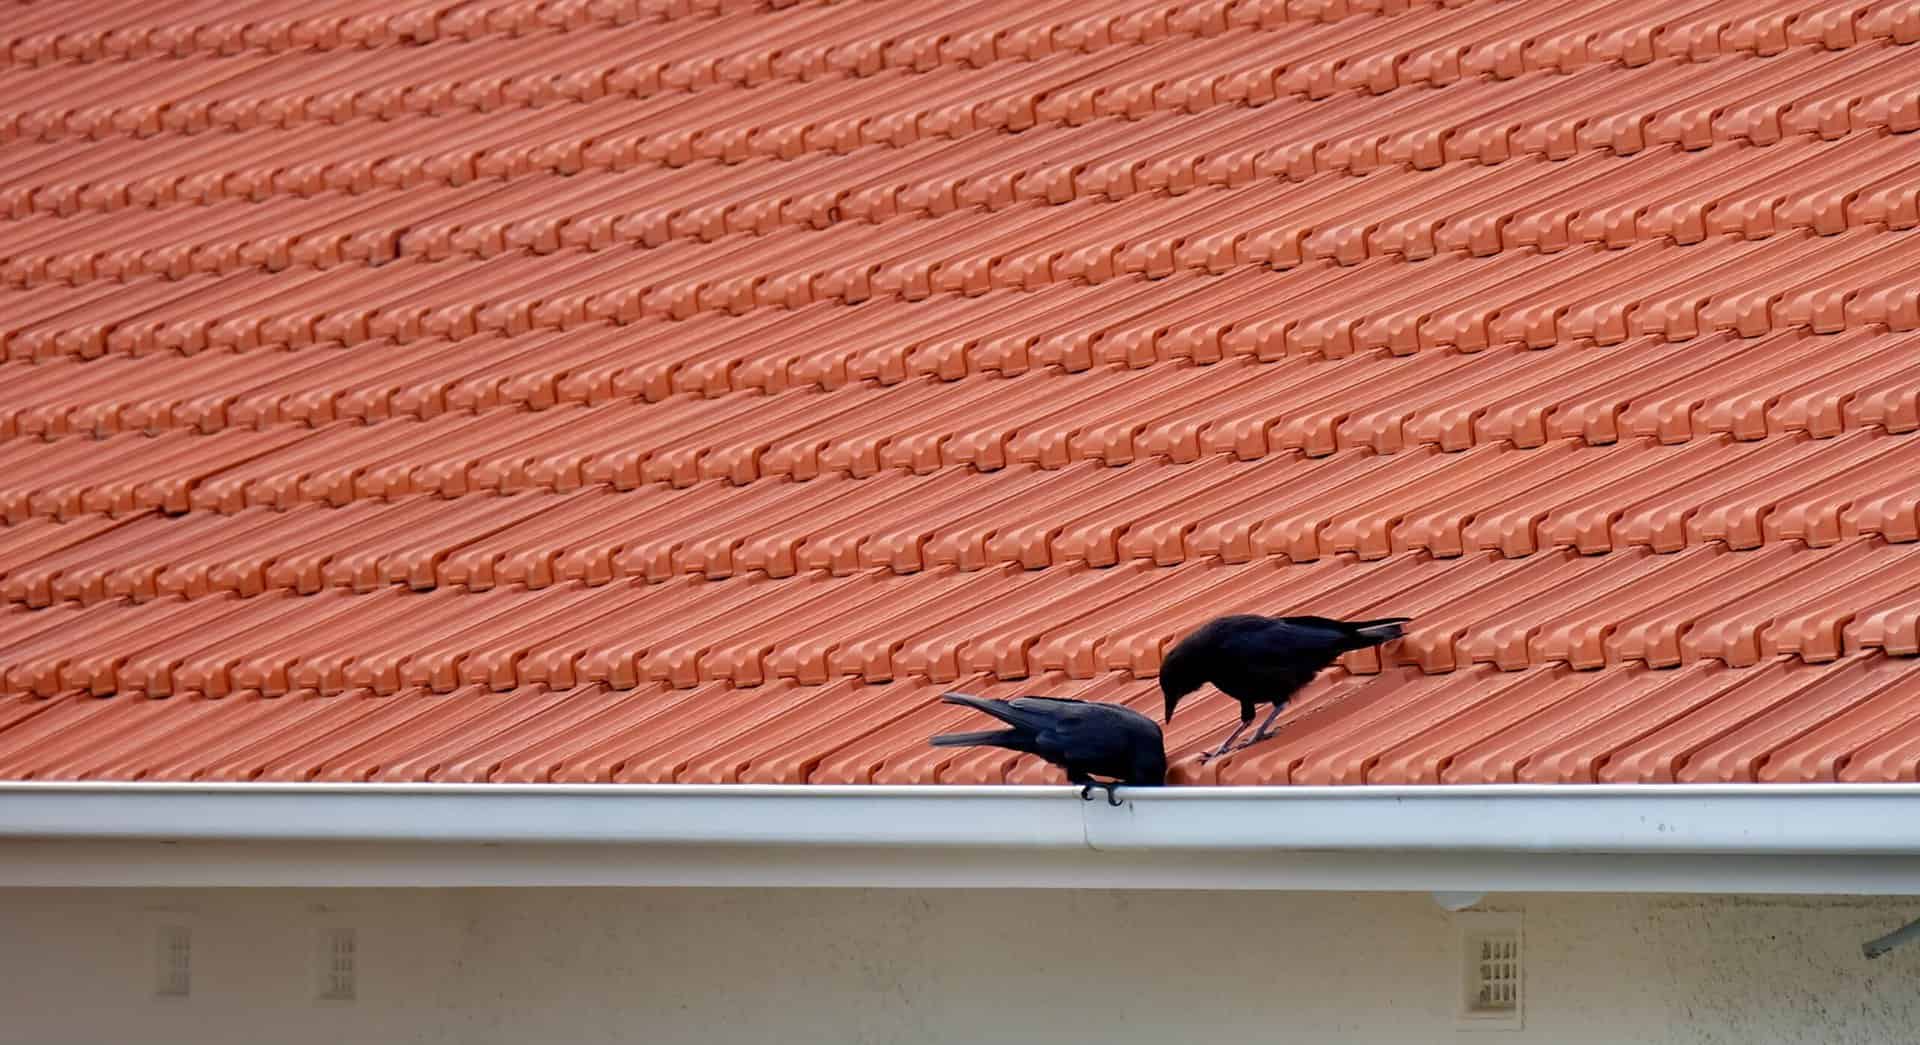 Two crows next to a traditional gutter system on a Minneapolis roof.